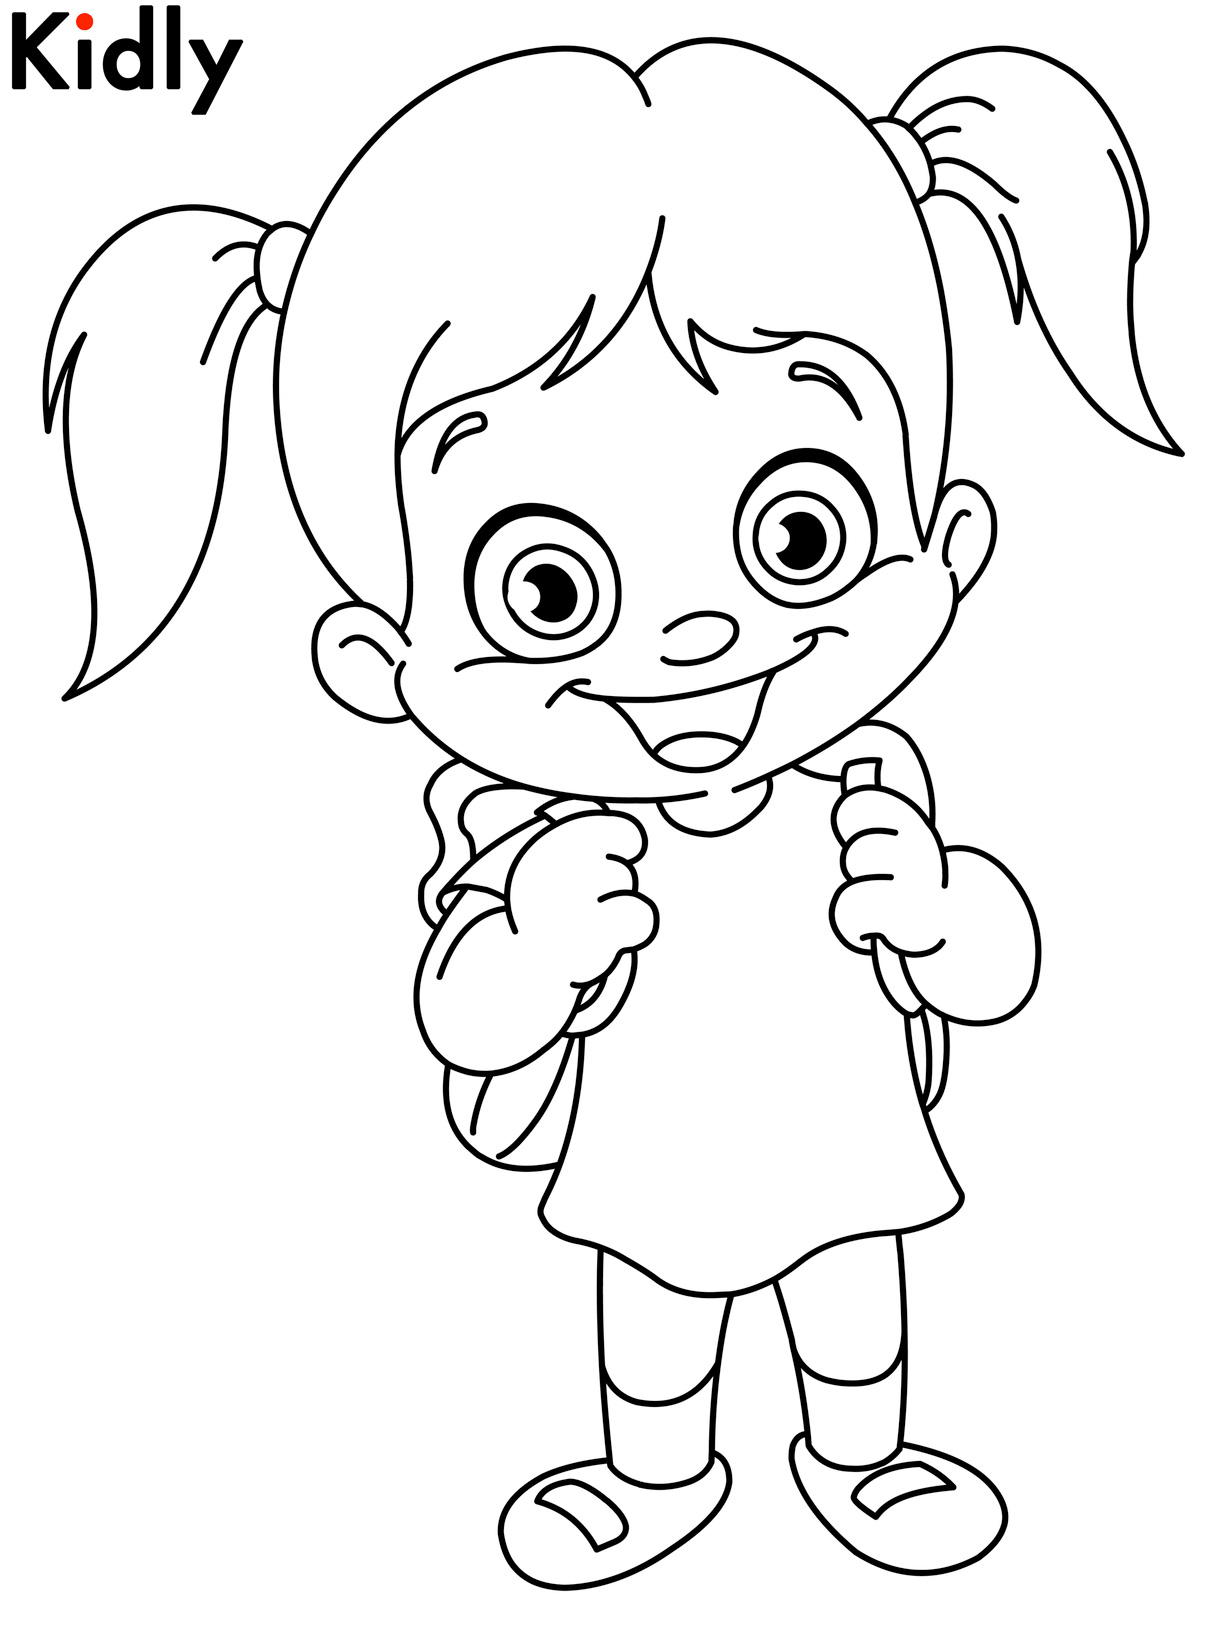 Download Childrens Day Coloring Pages Coloring Kids - Coloring Kids